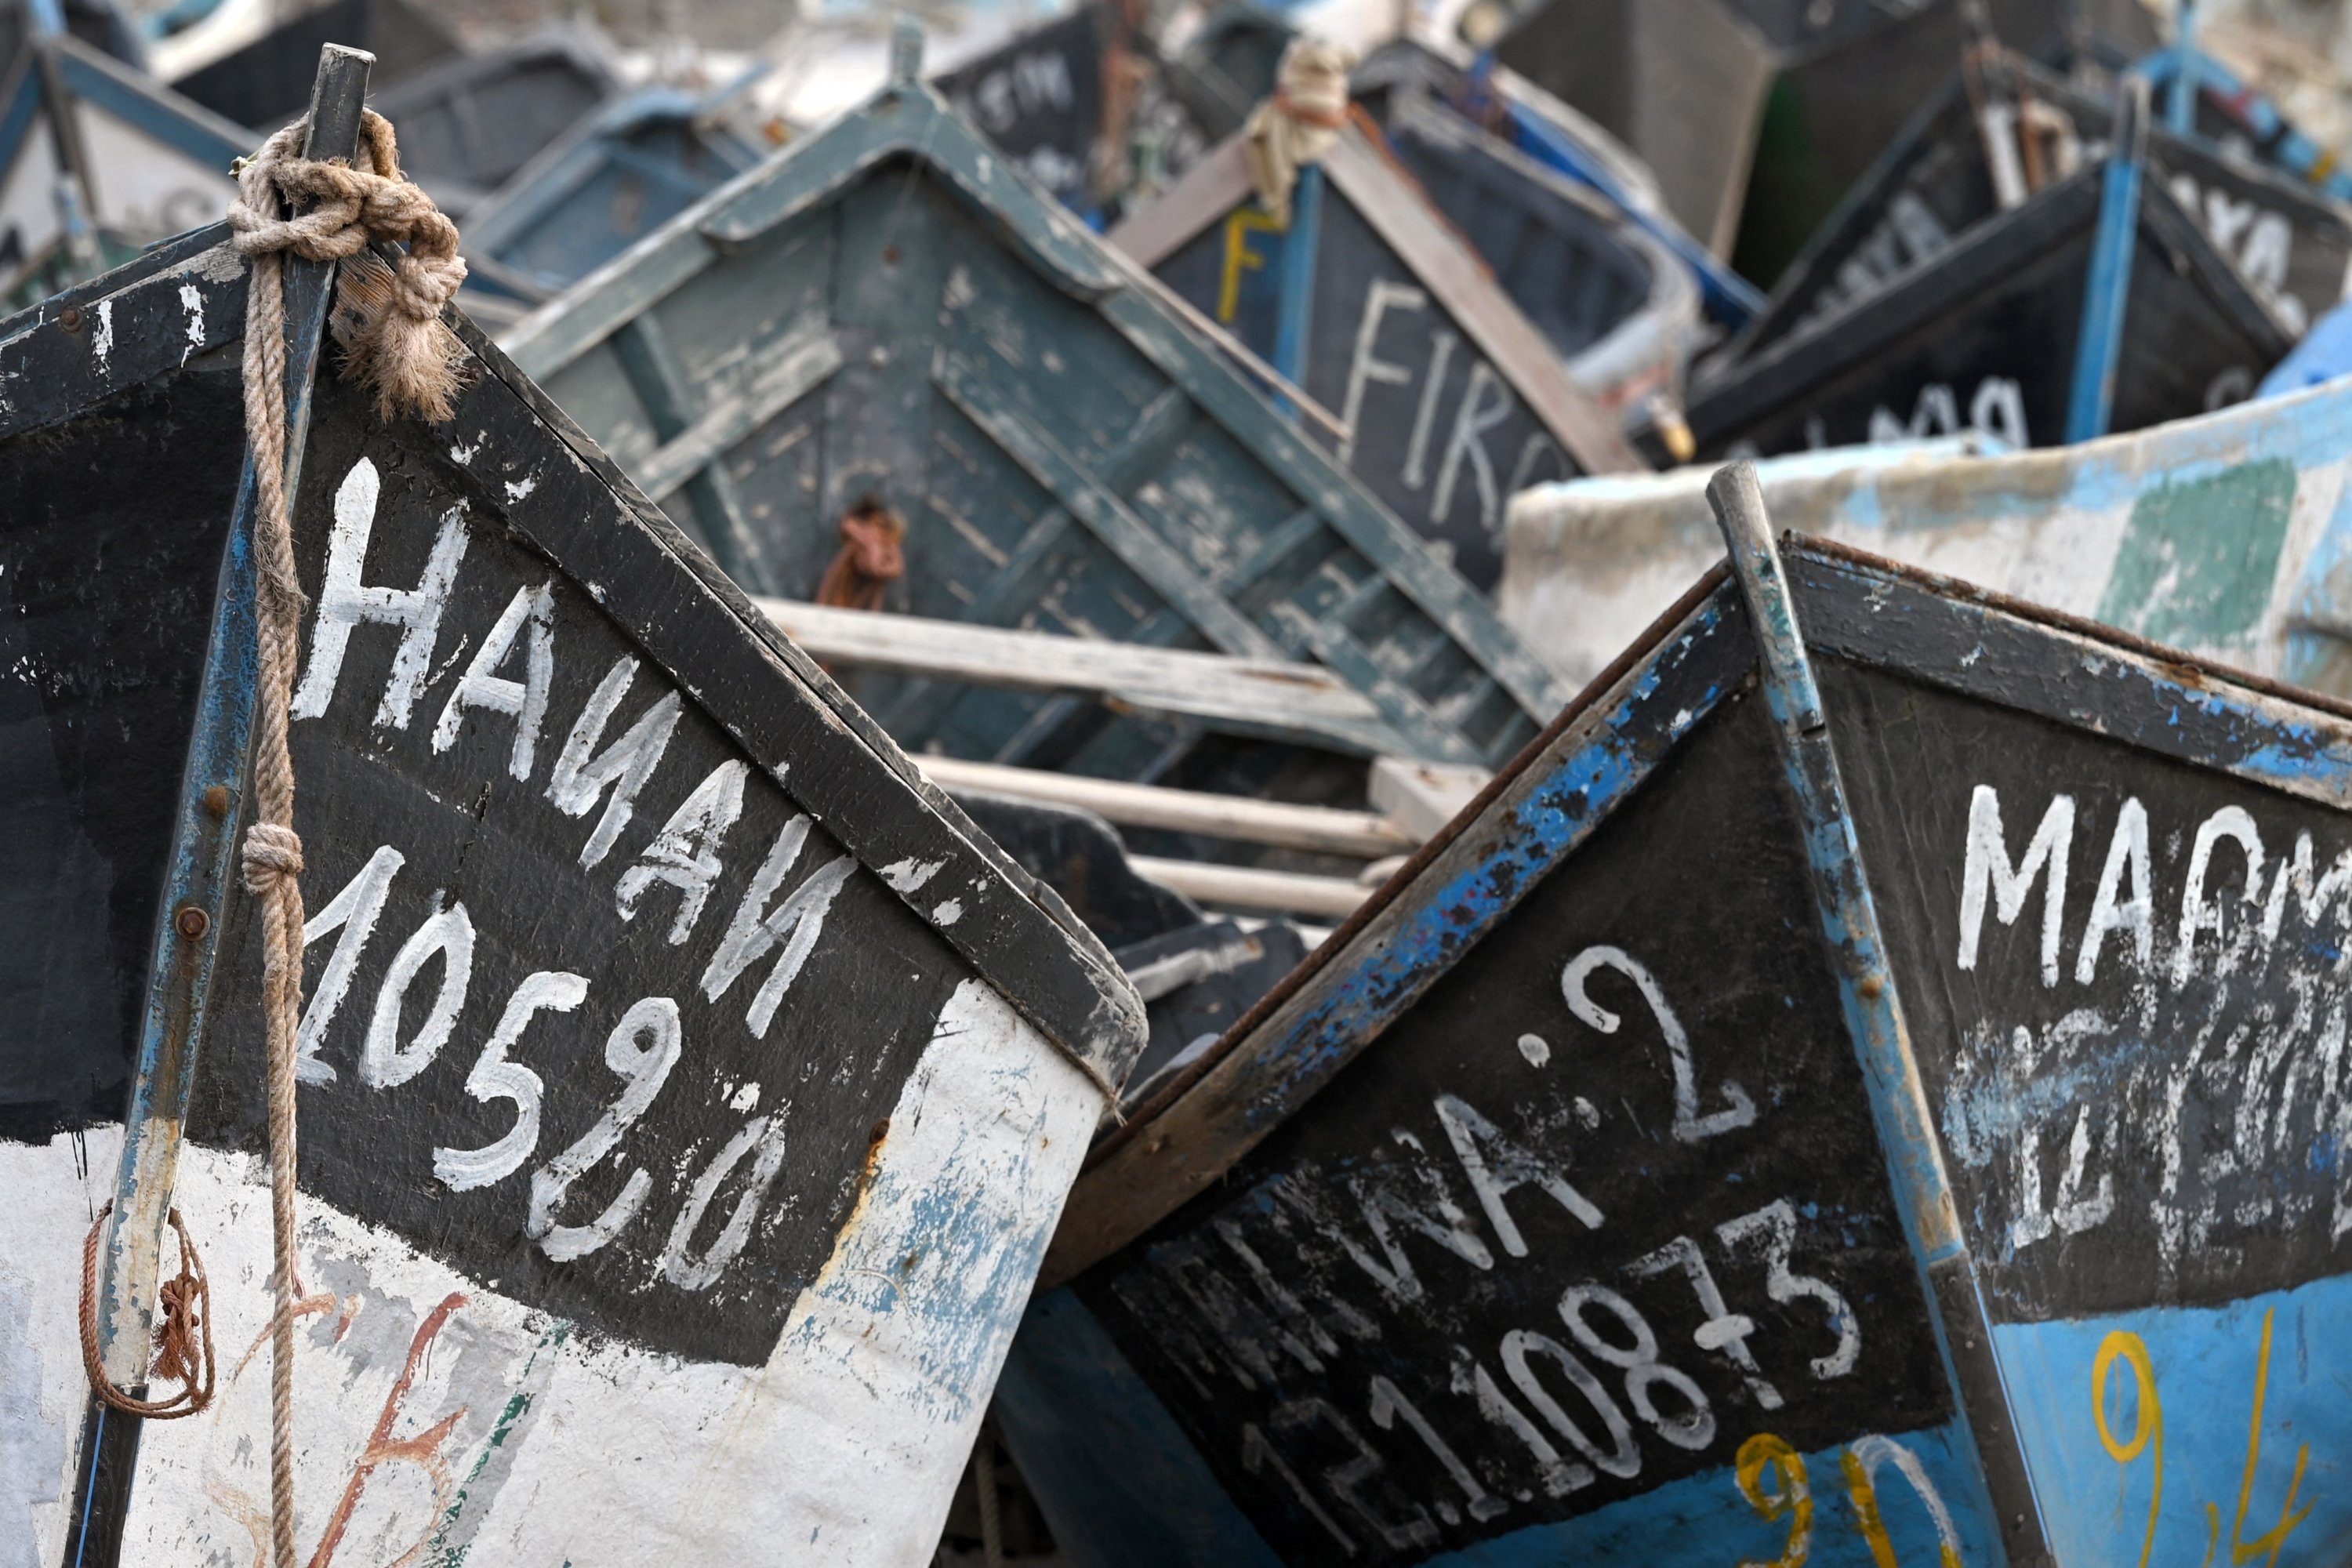 Vessels accumulate at a 'boat cemetery' in Arinaga on the island of Gran Canaria, Spain, Nov. 18, 2021. (AFP Photo)